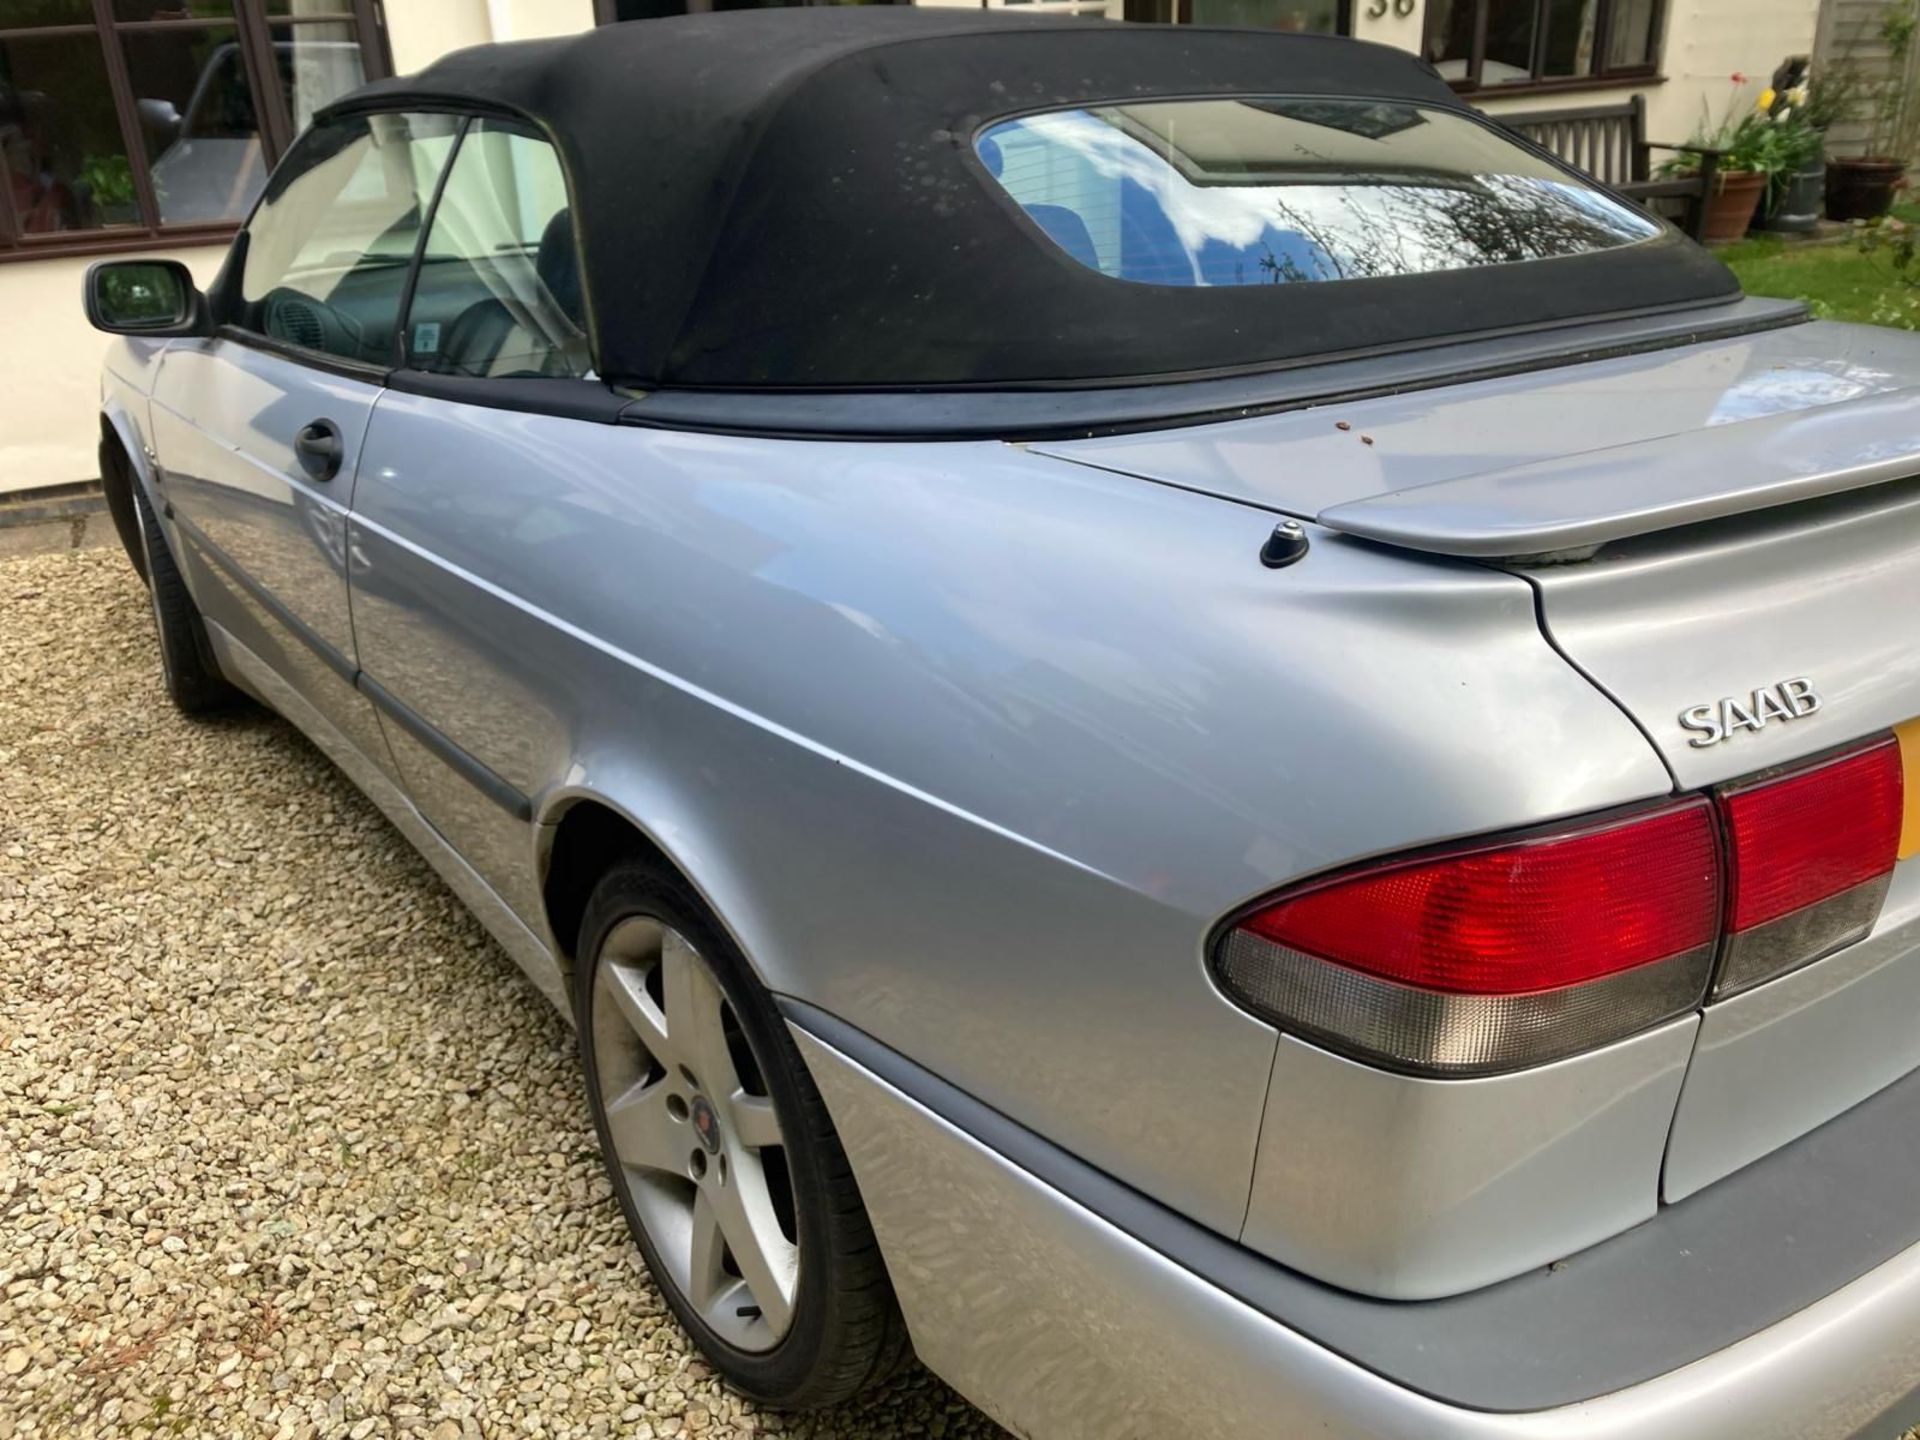 2002 Saab 9-3 Aero Convertible with 11 months MOT - Offered at No Reserve - Image 9 of 24